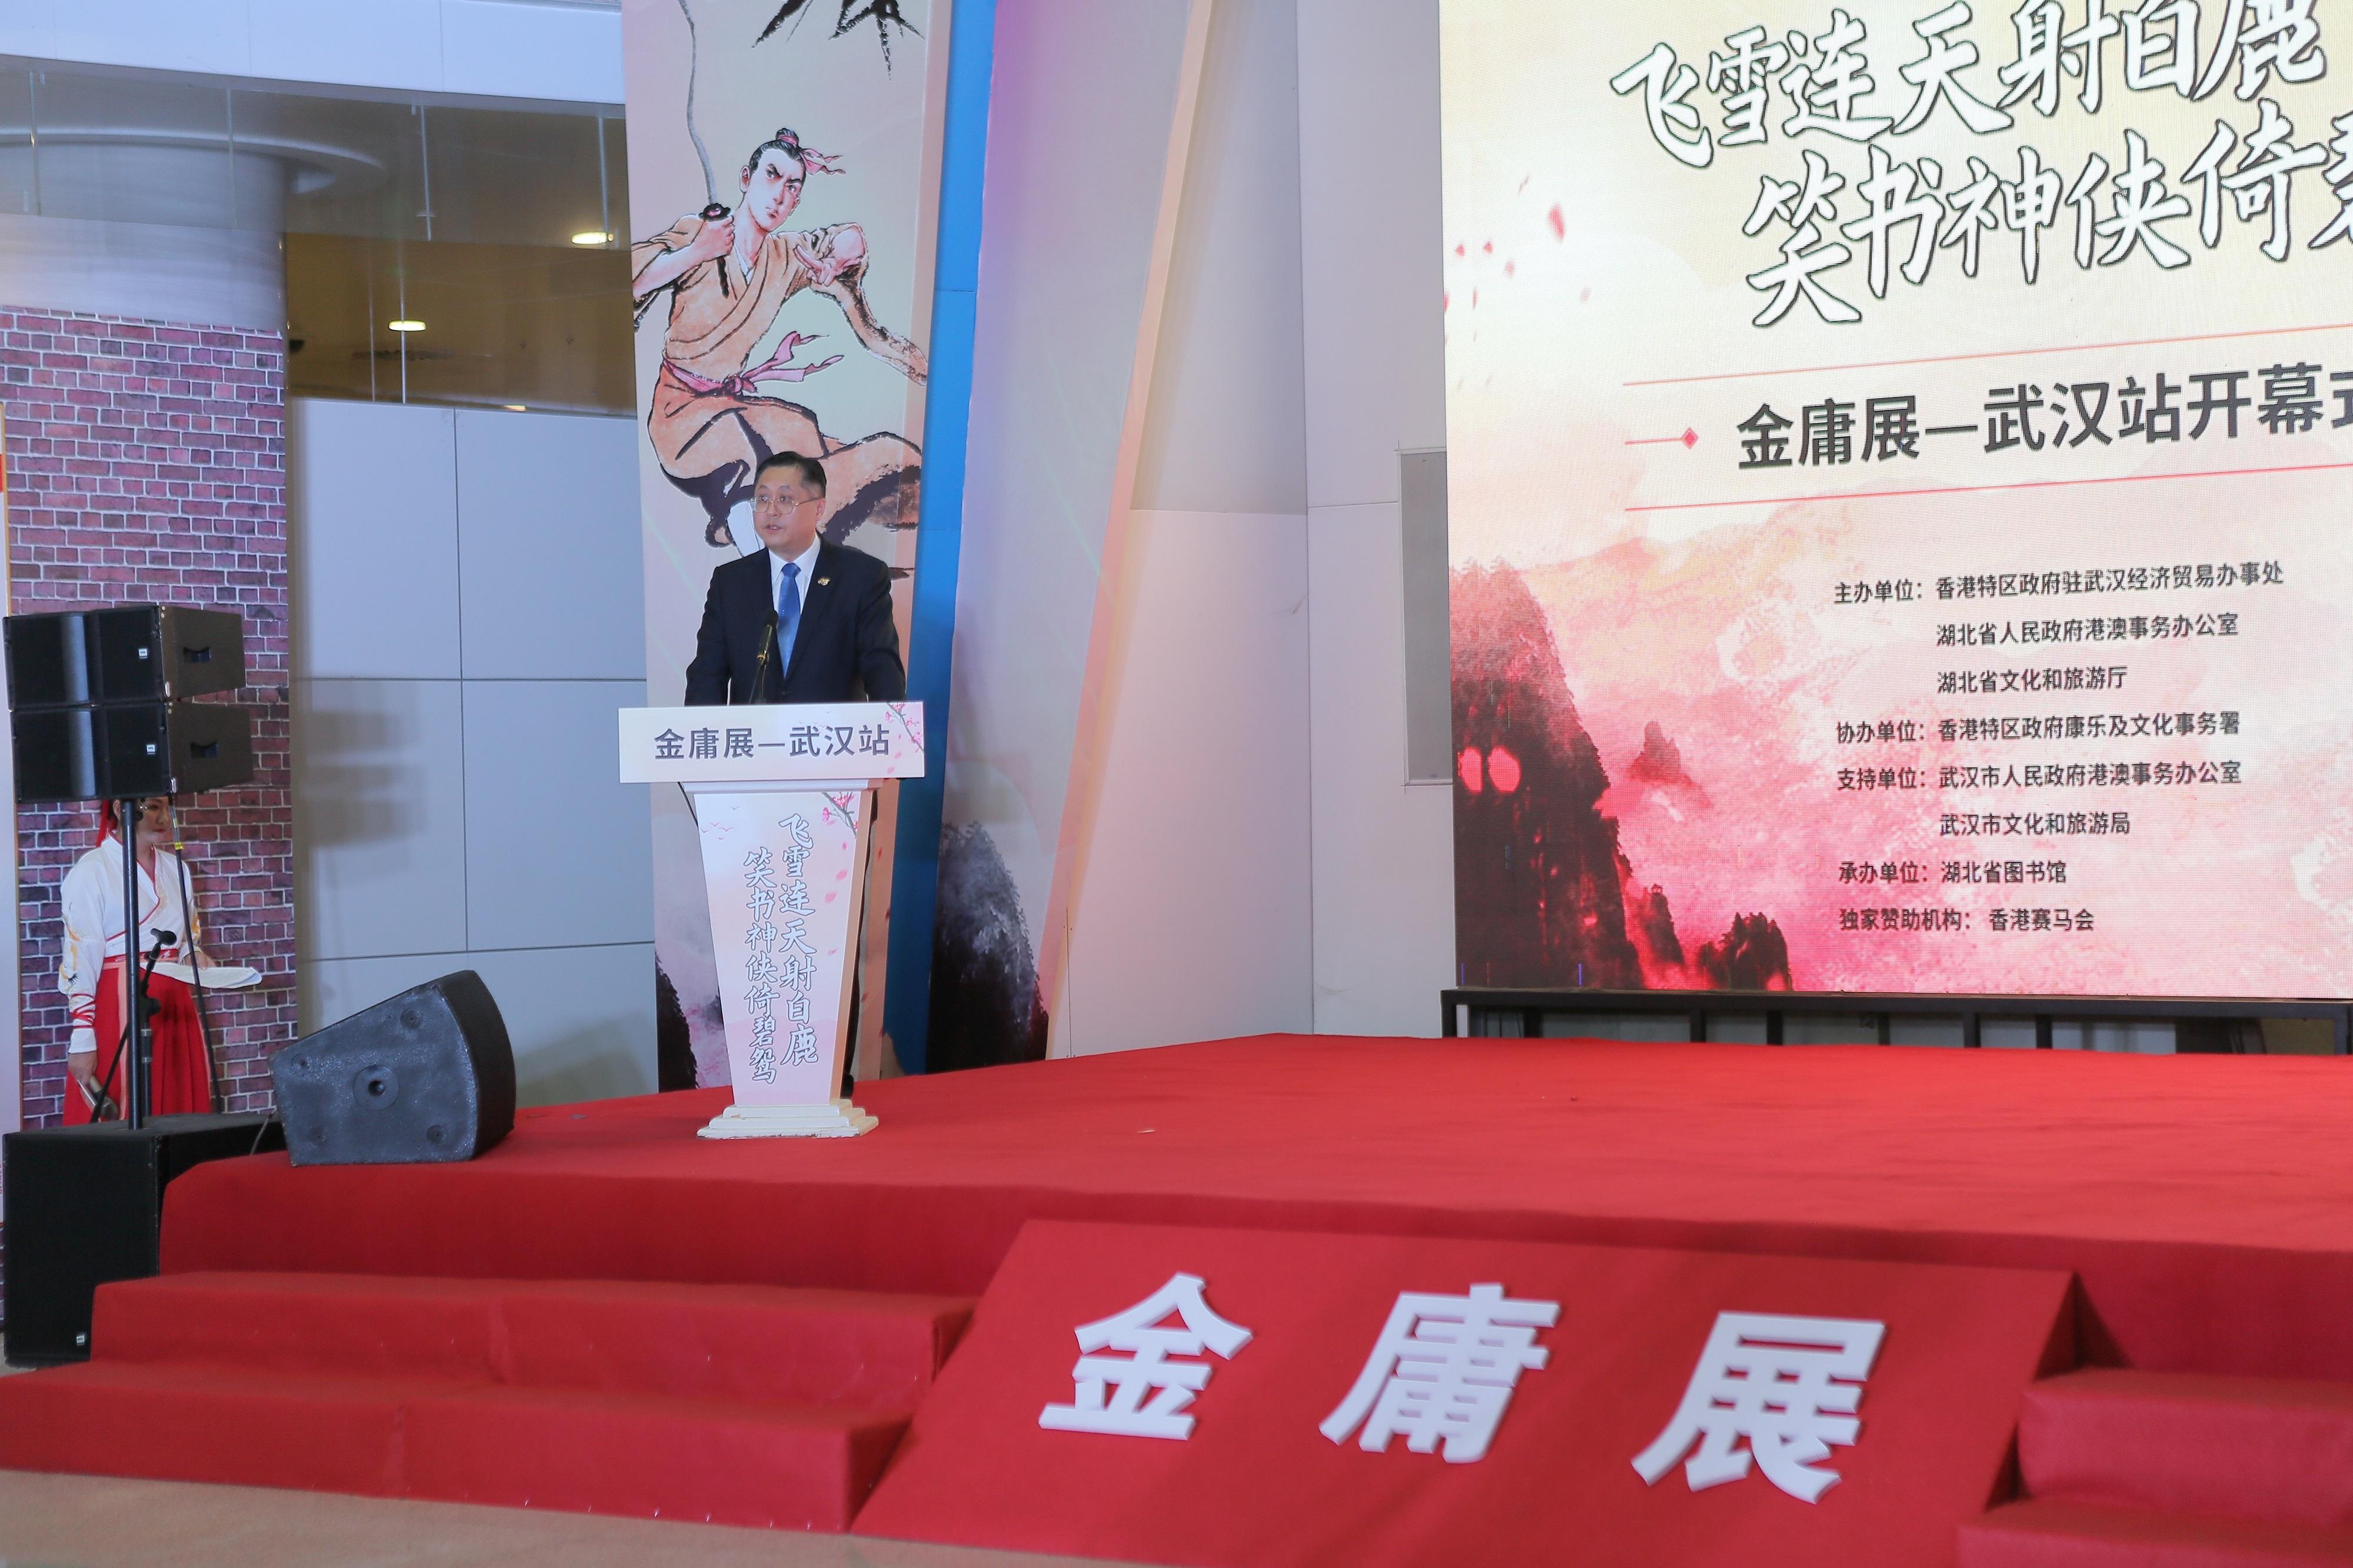 A themed exhibition on the veteran journalist and renowned writer, Dr Louis Cha (pen name Jin Yong), was officially opened today (September 9) at the Hubei Provincial Library in Wuhan. Photo shows the Director of the Hong Kong Economic and Trade Office in Wuhan, Mr Franco Kwok, delivering a speech at the opening ceremony.